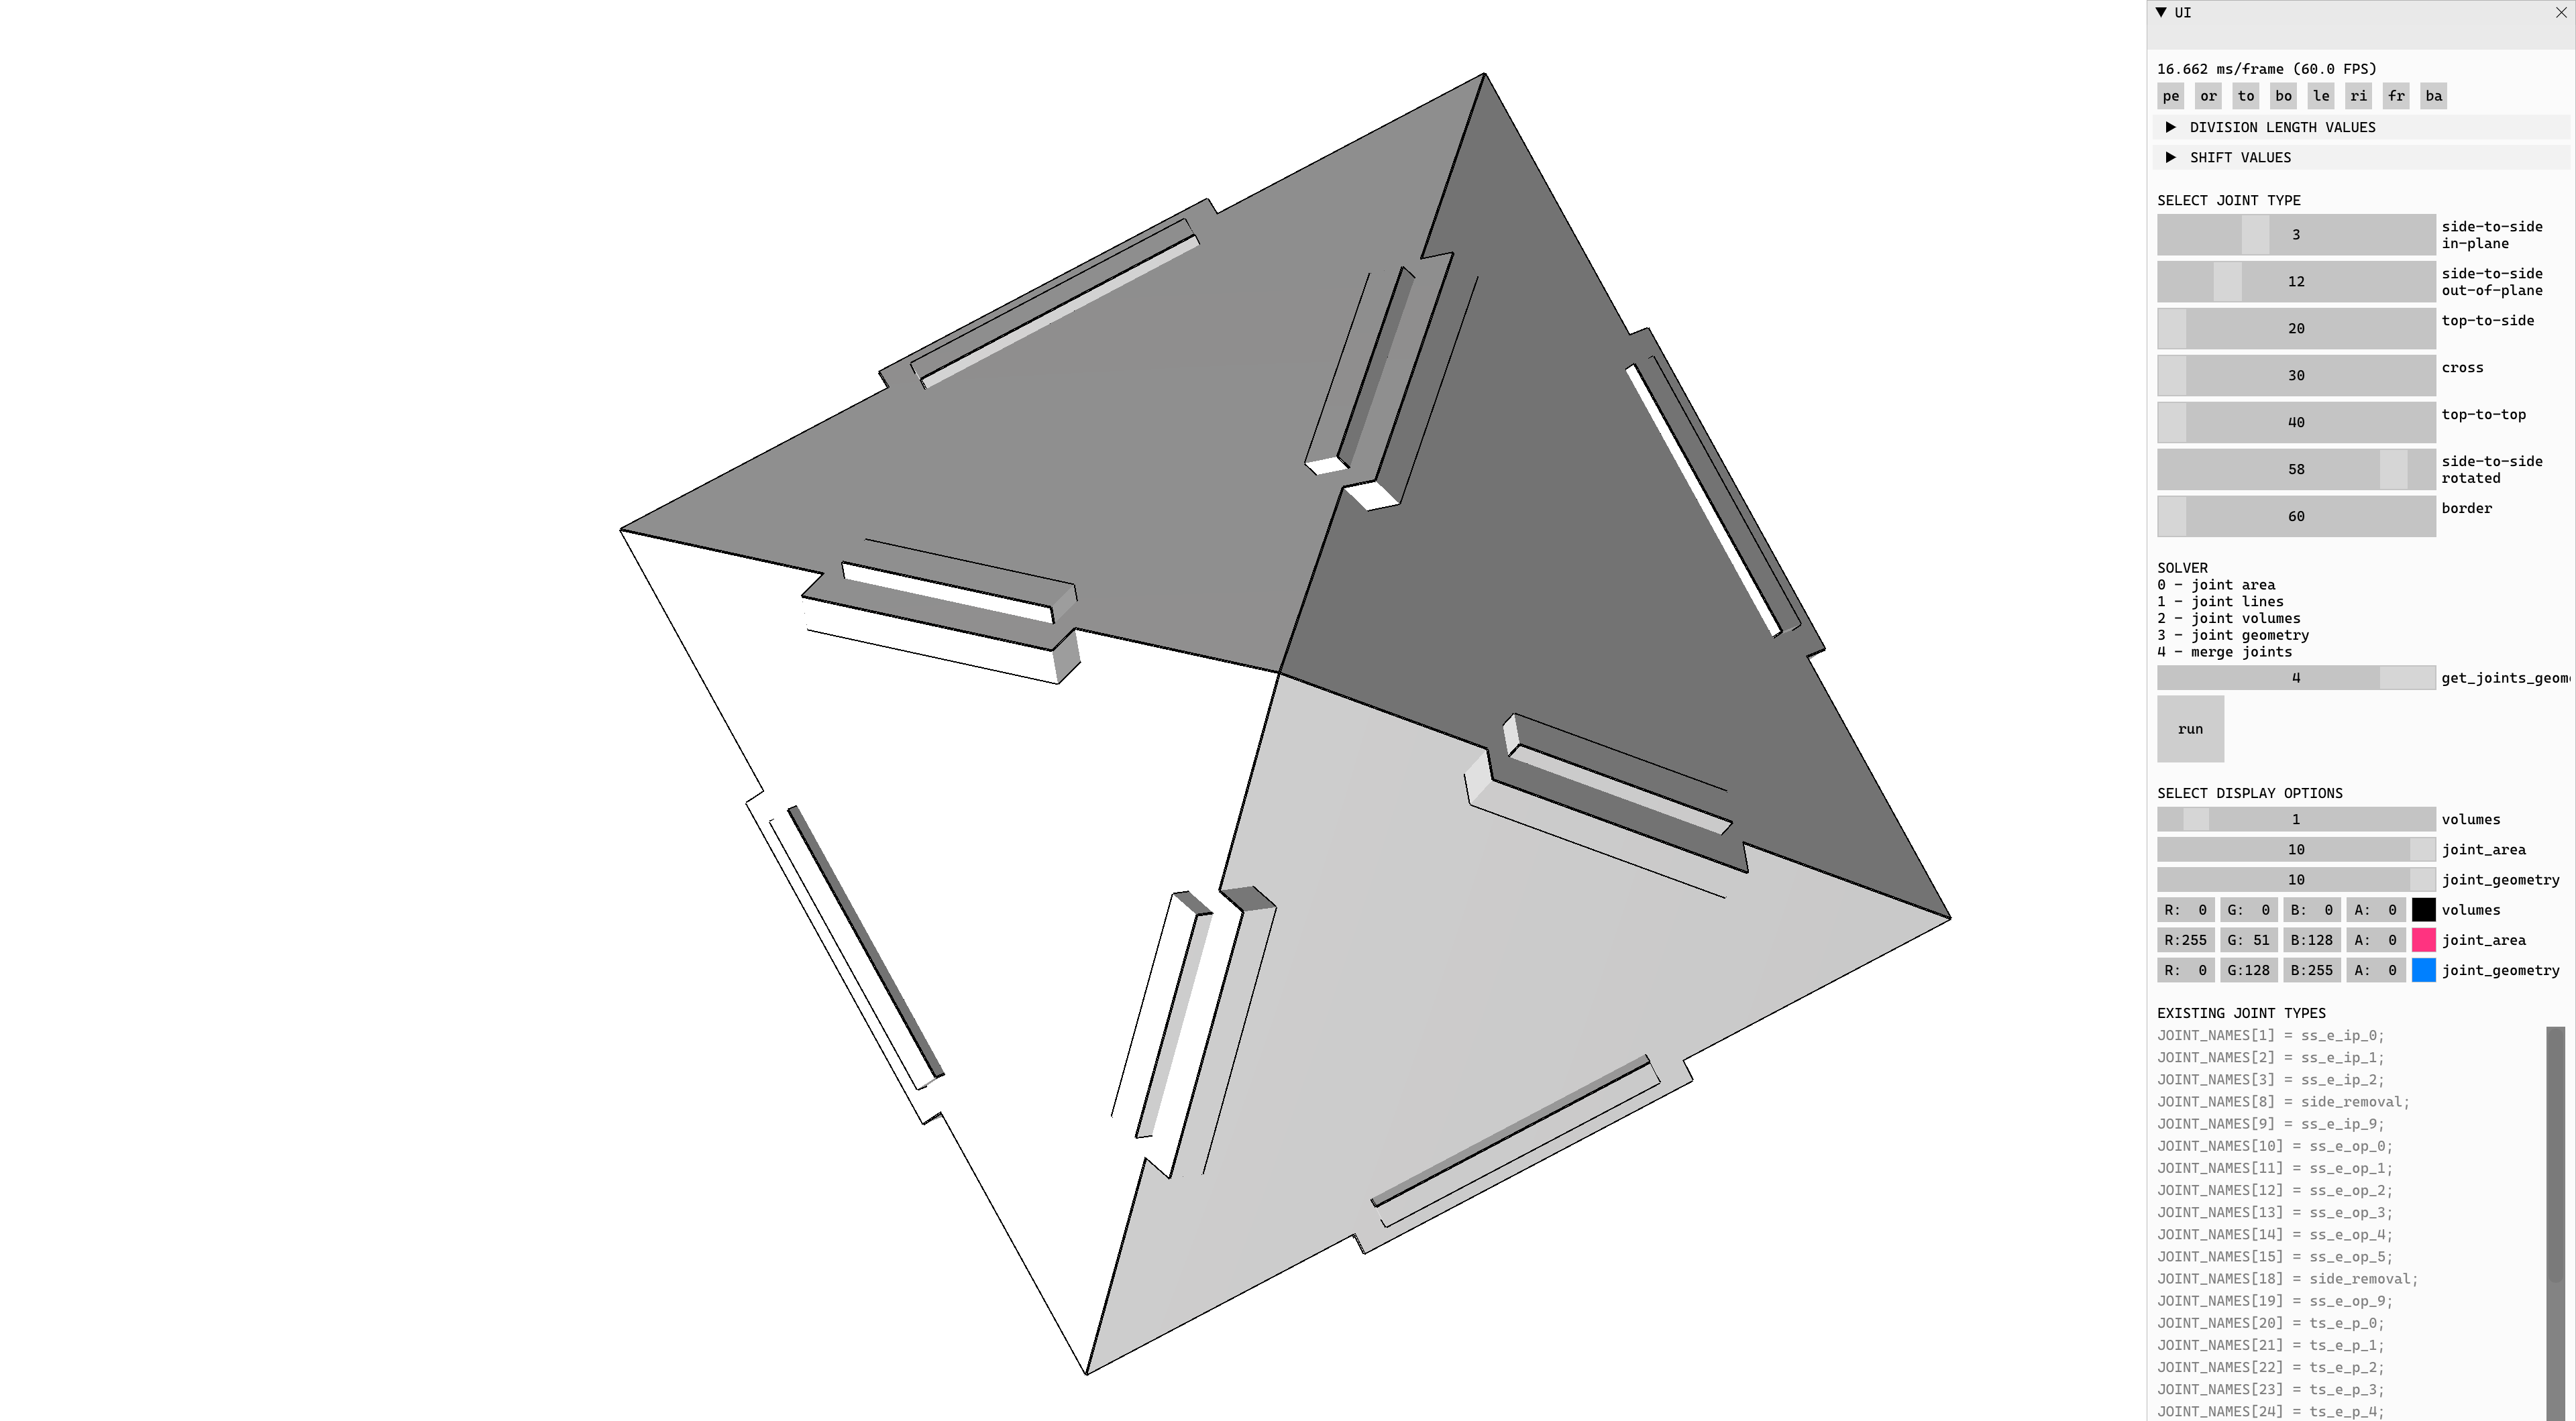 _images/type_plates_name_side_to_side_edge_outofplane_octahedron.png